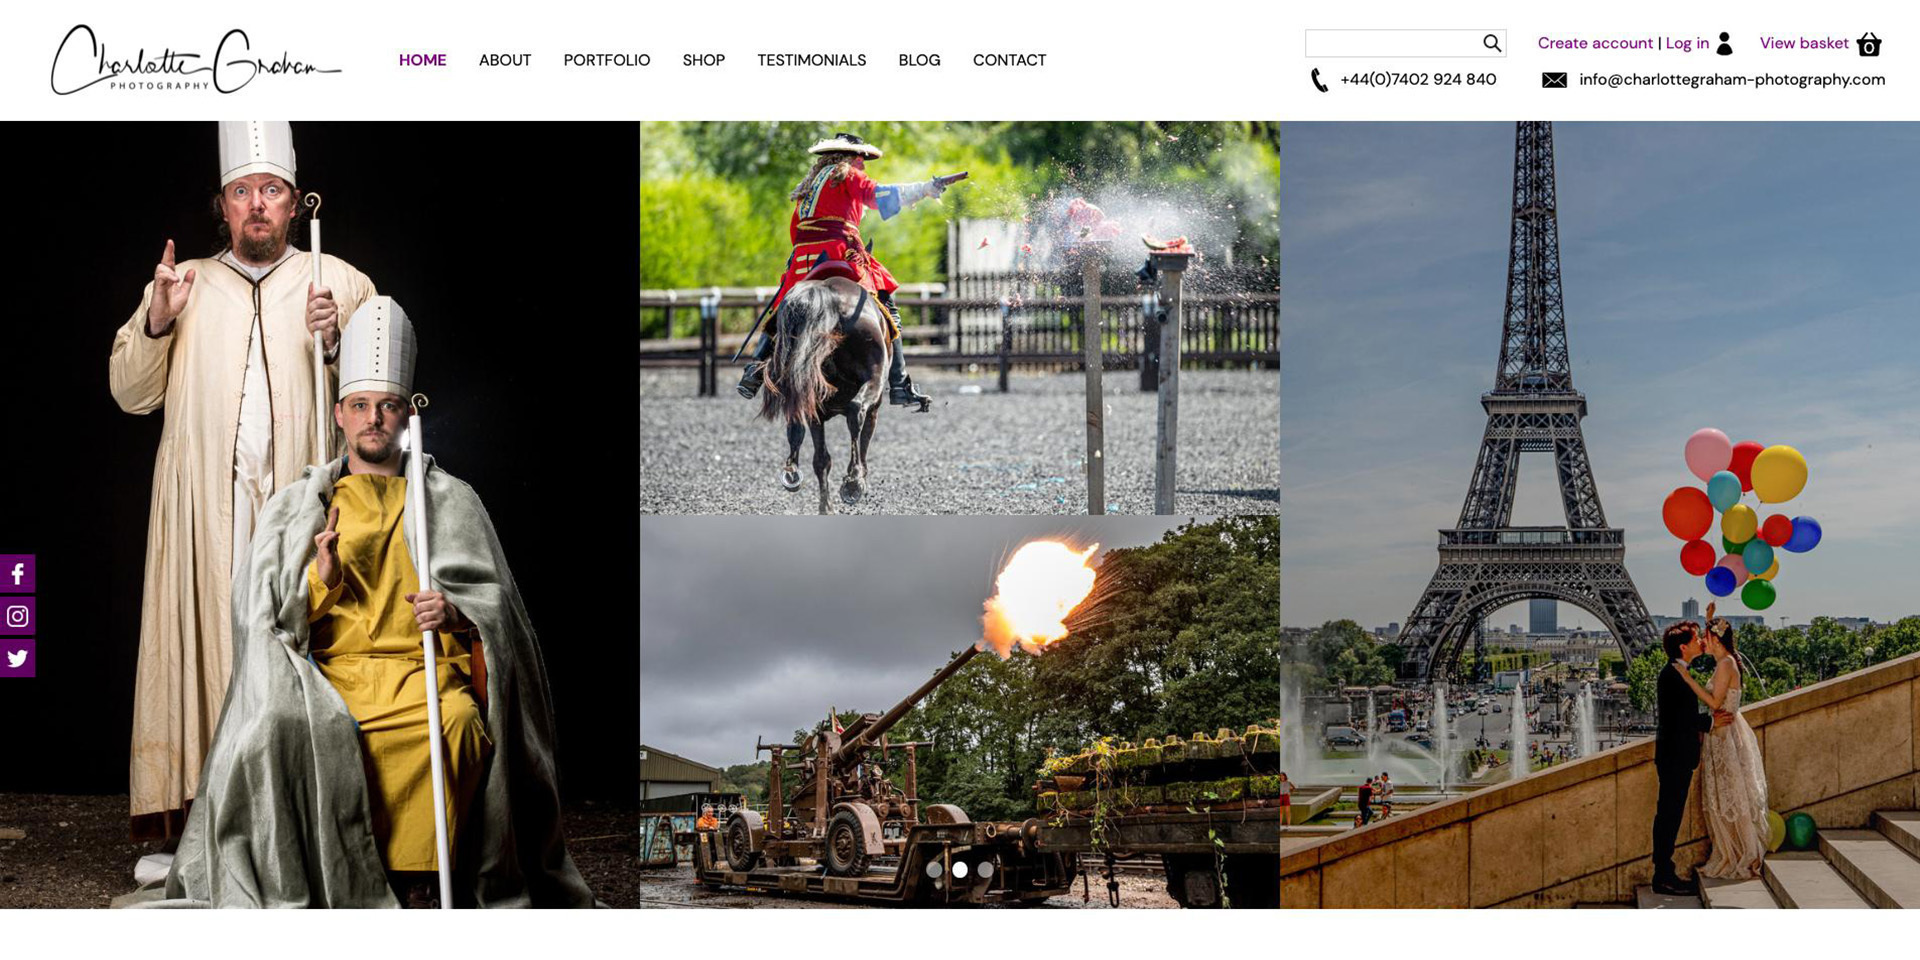 The new Charlotte Graham Photography website designed by it'seeze, displayed on desktop